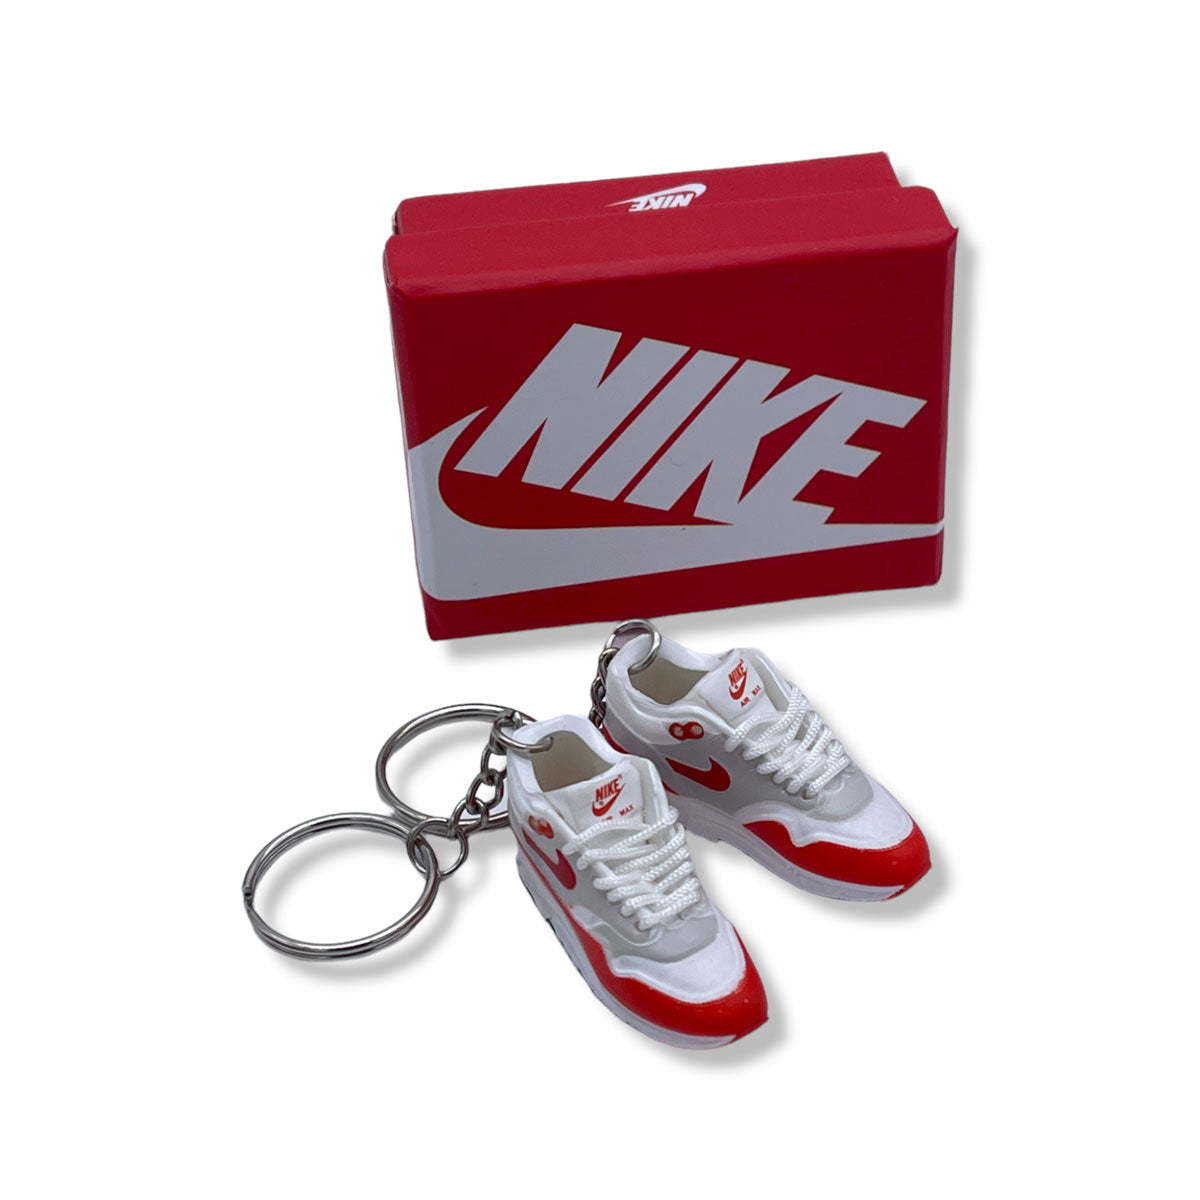 3D Sneaker Keychain- Air Max 1 OG White Red Pair - KickzStore